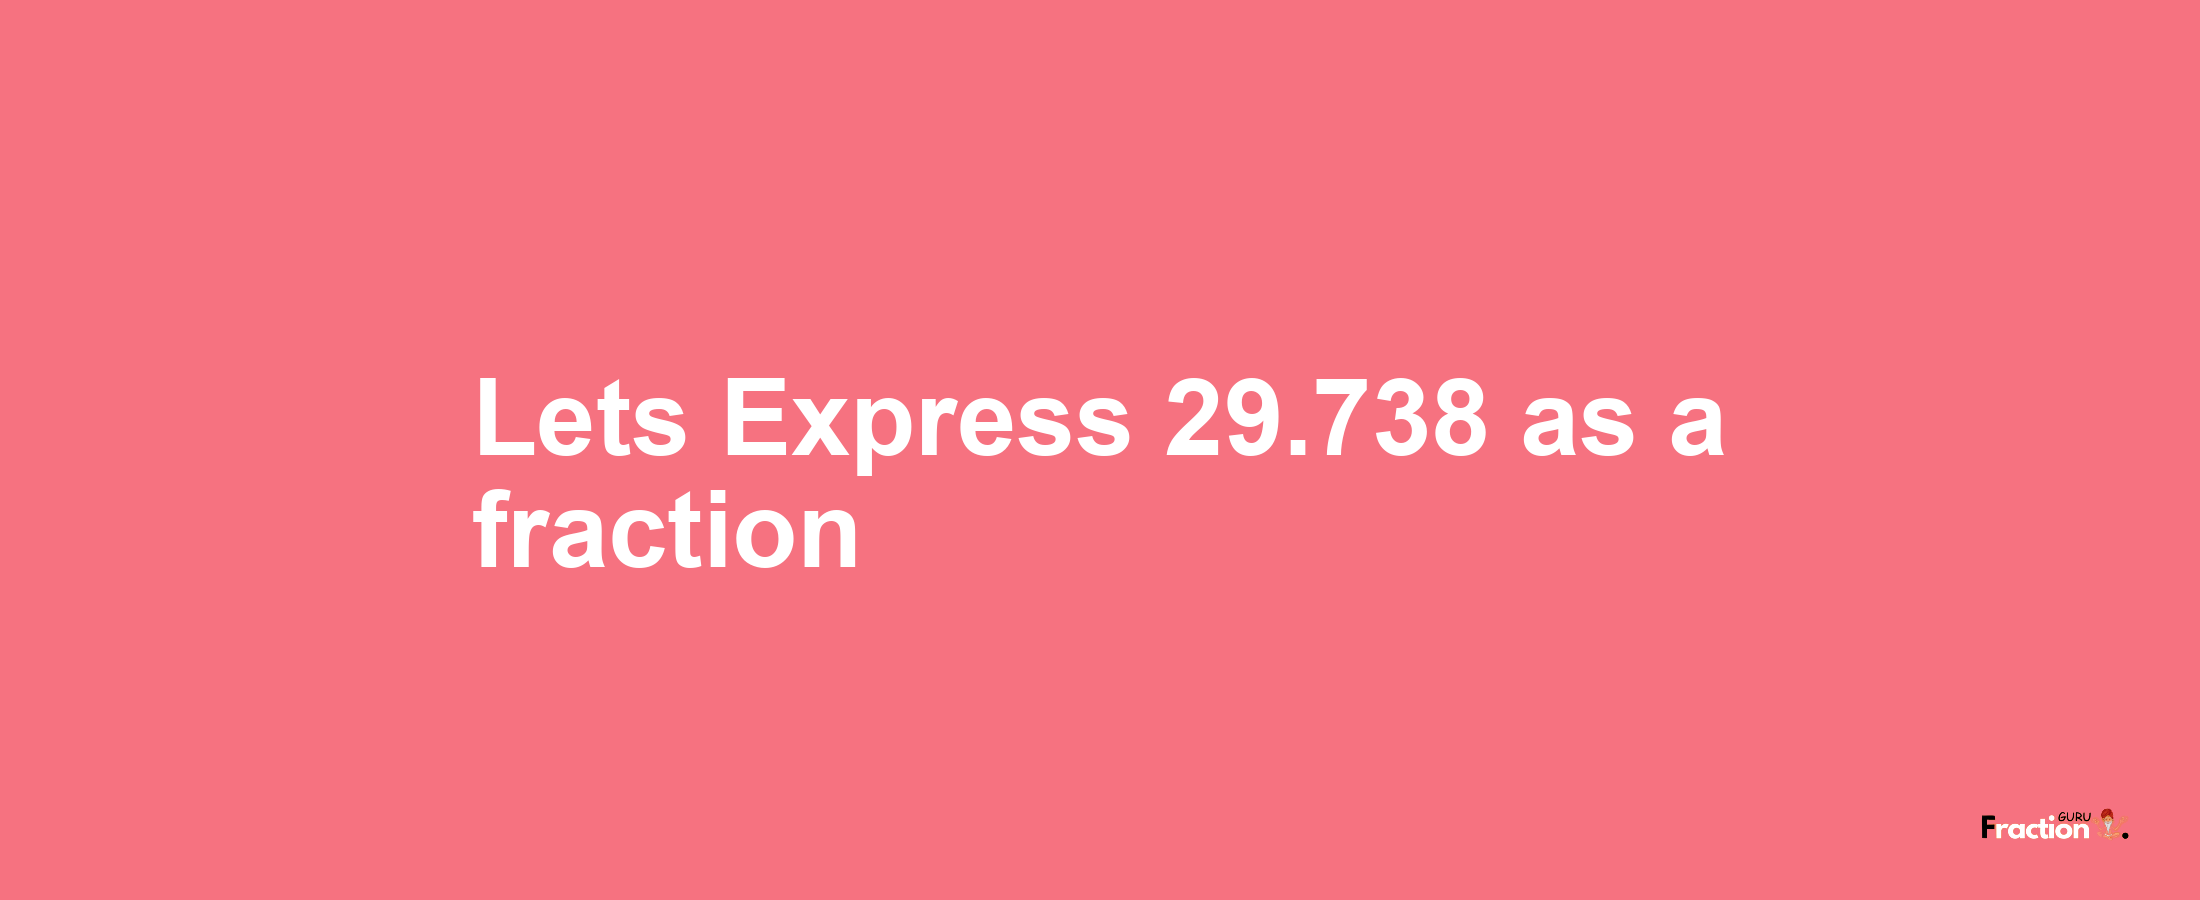 Lets Express 29.738 as afraction